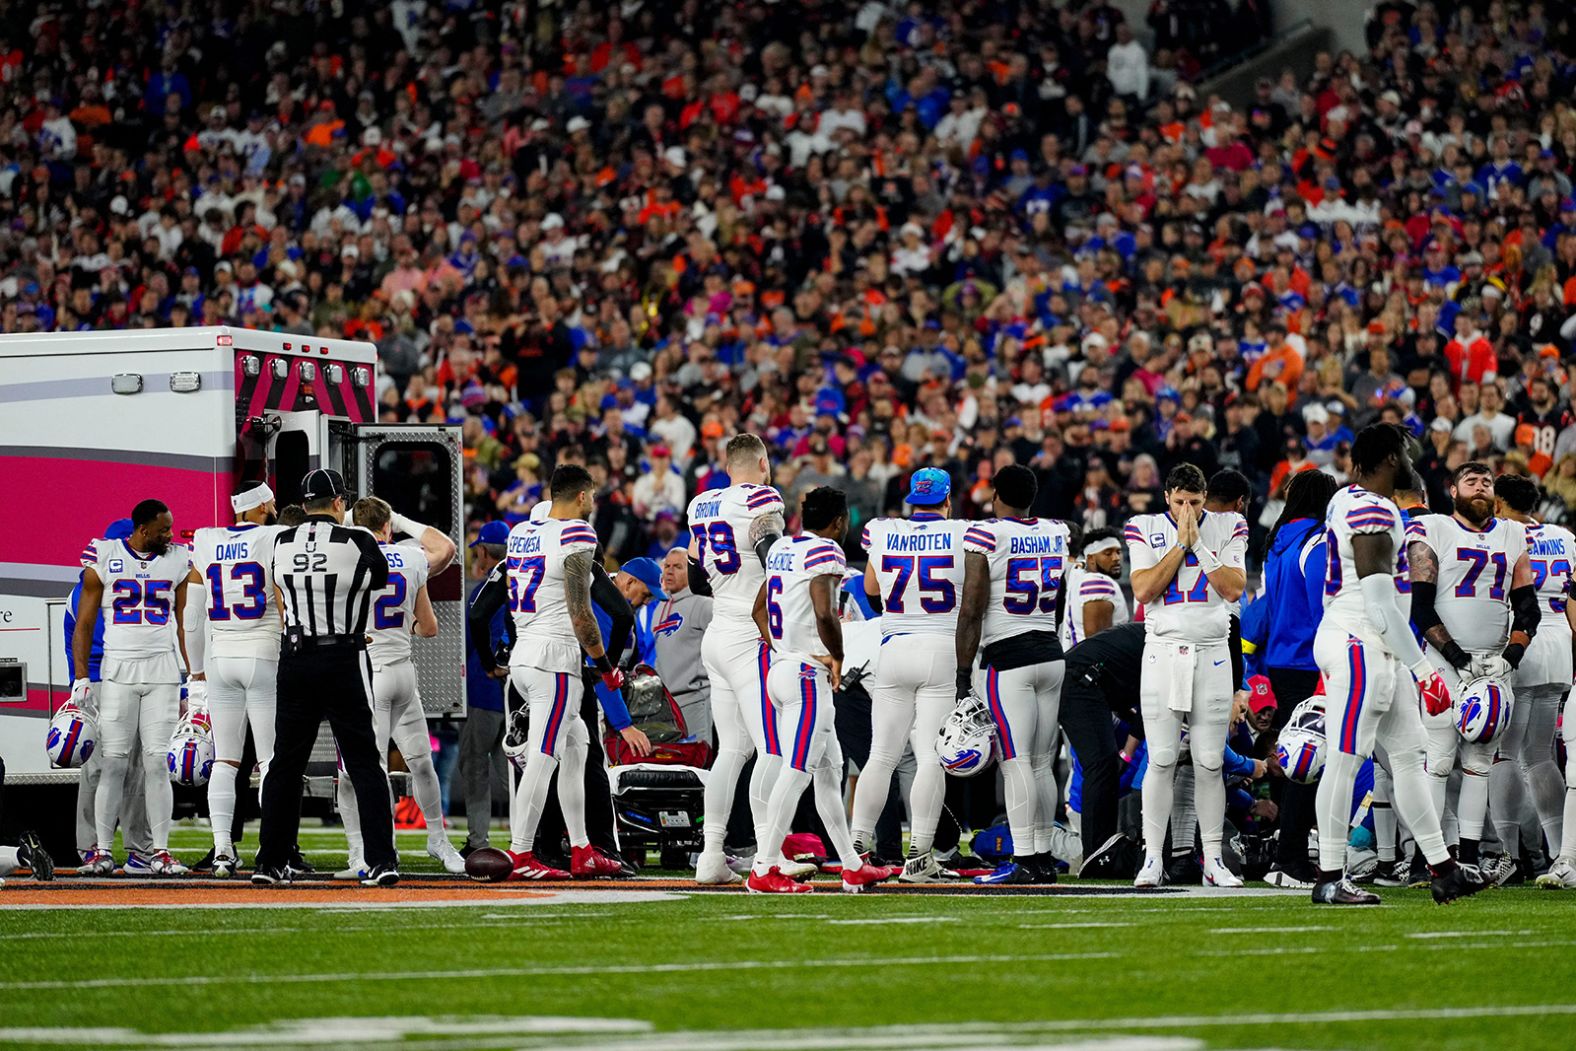 Buffalo Bills players react after teammate Damar Hamlin suffered cardiac arrest and collapsed on the field during an NFL game against the Cincinnati Bengals on Monday, January 2. Hamlin was resuscitated and intubated on the field, according to Dr. William Knight IV, a professor with the University of Cincinnati's department of emergency medicine. He was still critically ill as of Thursday, but he was awake and <a href="index.php?page=&url=https%3A%2F%2Fwww.cnn.com%2F2023%2F01%2F05%2Fsport%2Fdamar-hamlin-collapse-bills-status-thursday%2Findex.html" target="_blank">showing signs of improvement</a>, doctors said.